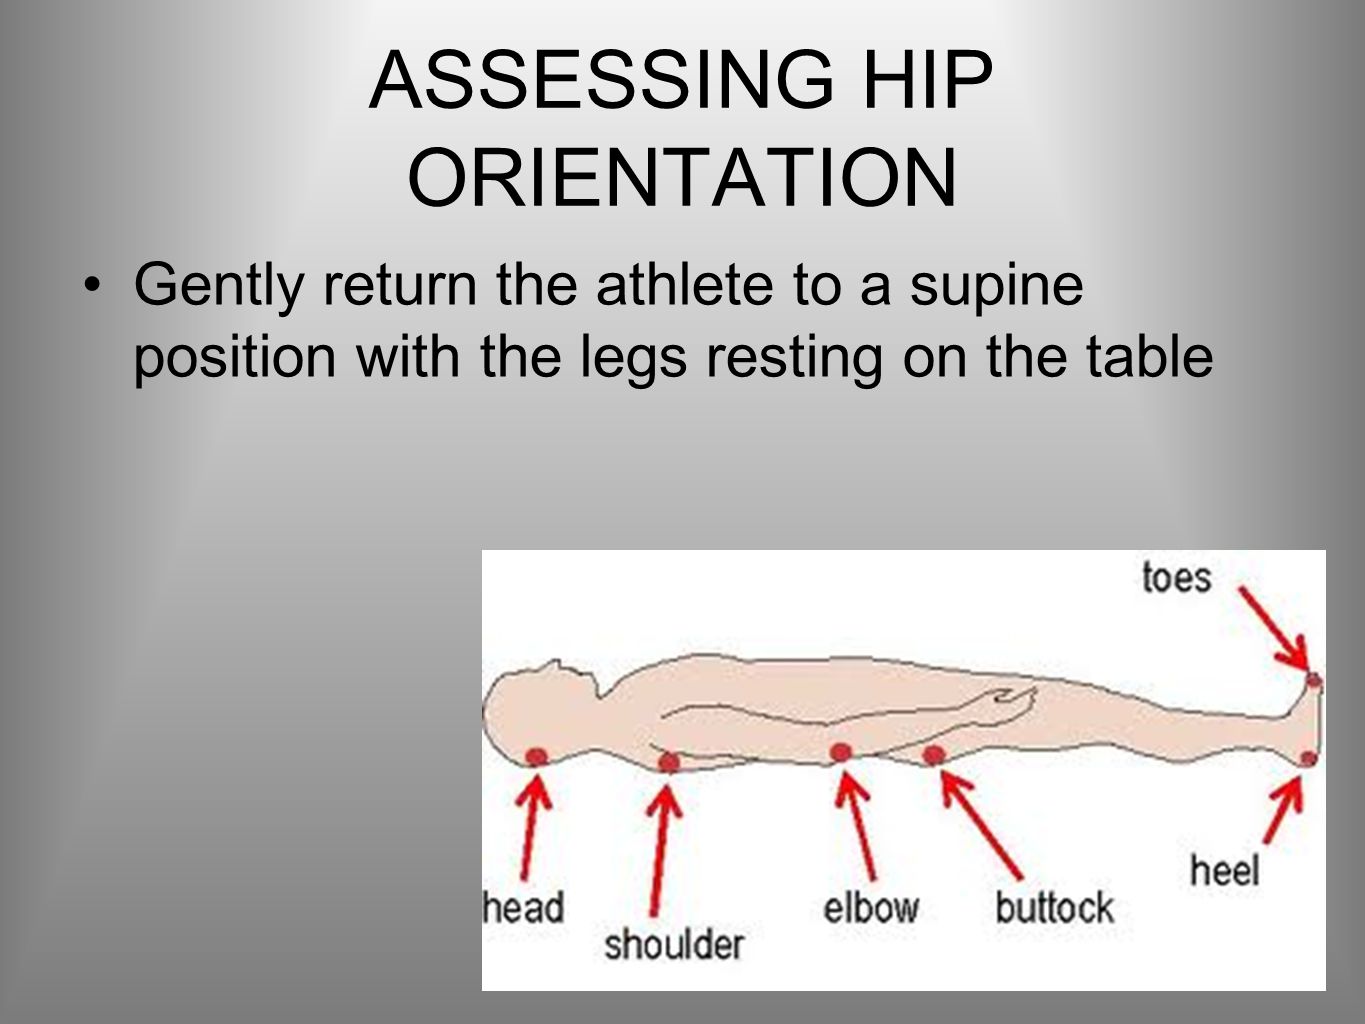 ASSESSING HIP ORIENTATION Gently return the athlete to a supine position with the legs resting on the table